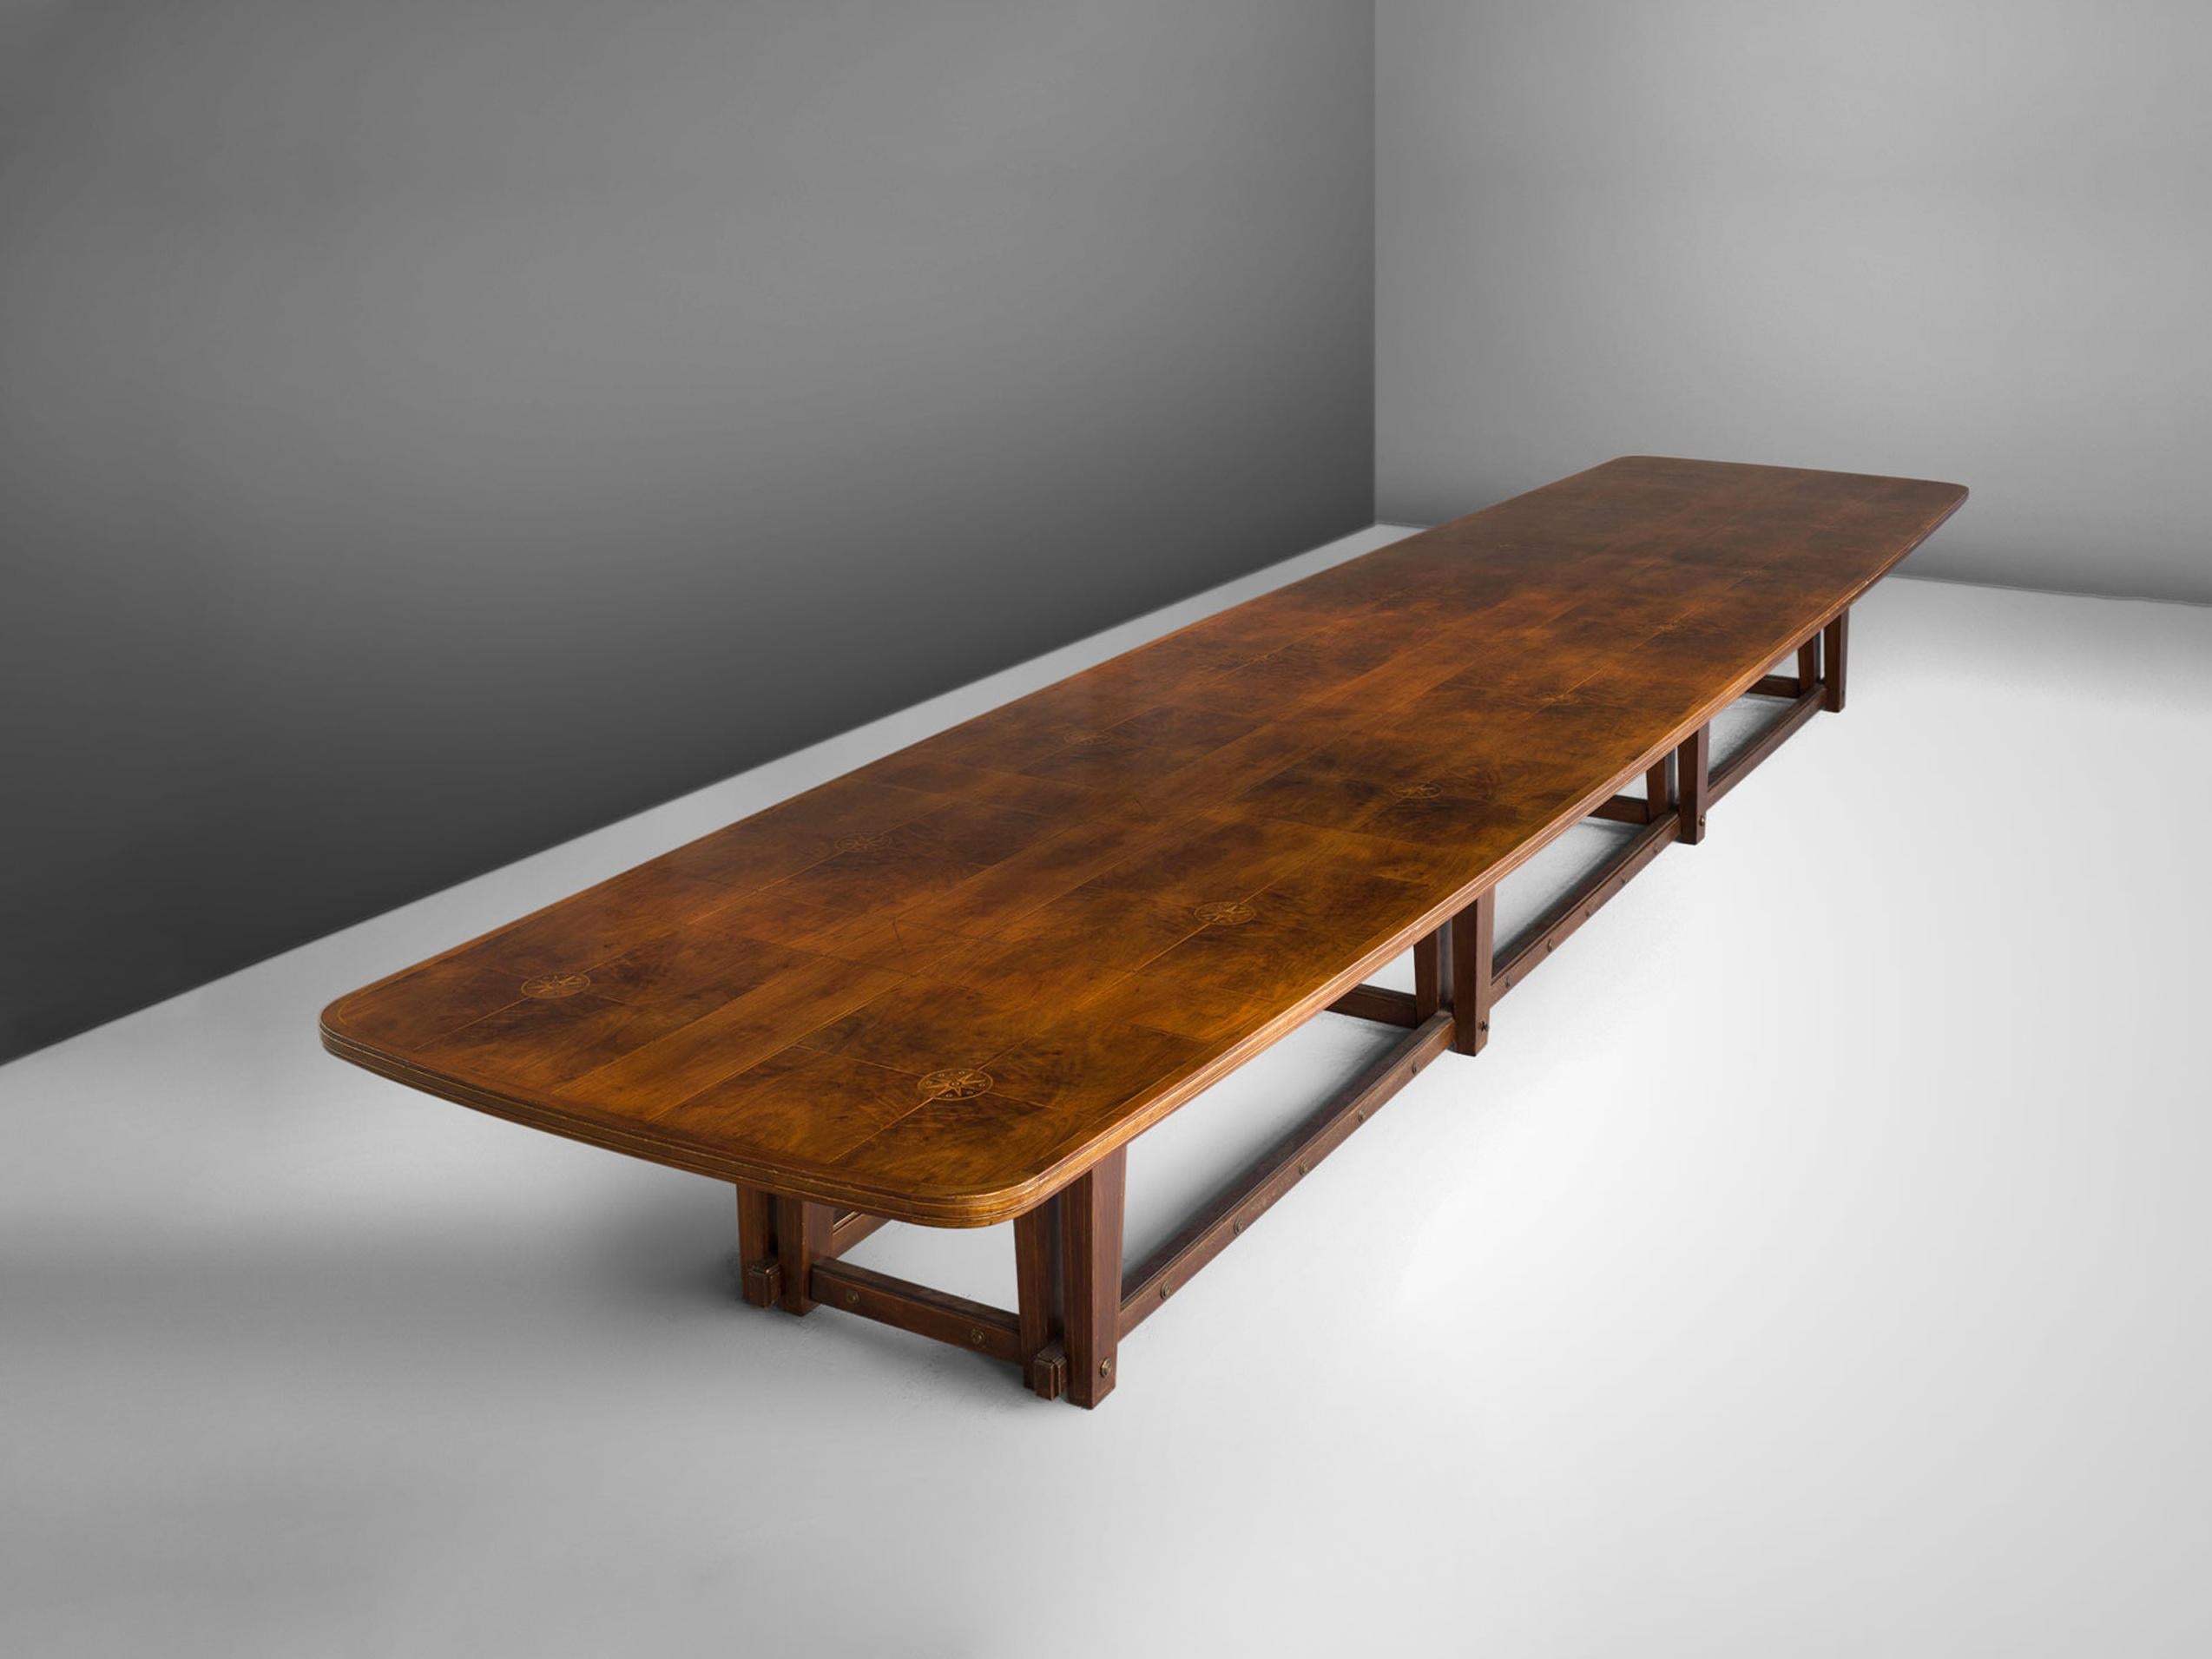 Conference table, walnut, brass, Europe, 1940s

Extremely large conference table in walnut. The top shows beautiful inlaid wood that has a sun or starlike motif. A geometric pattern is created due to horizontal and vertical lines. The large top is